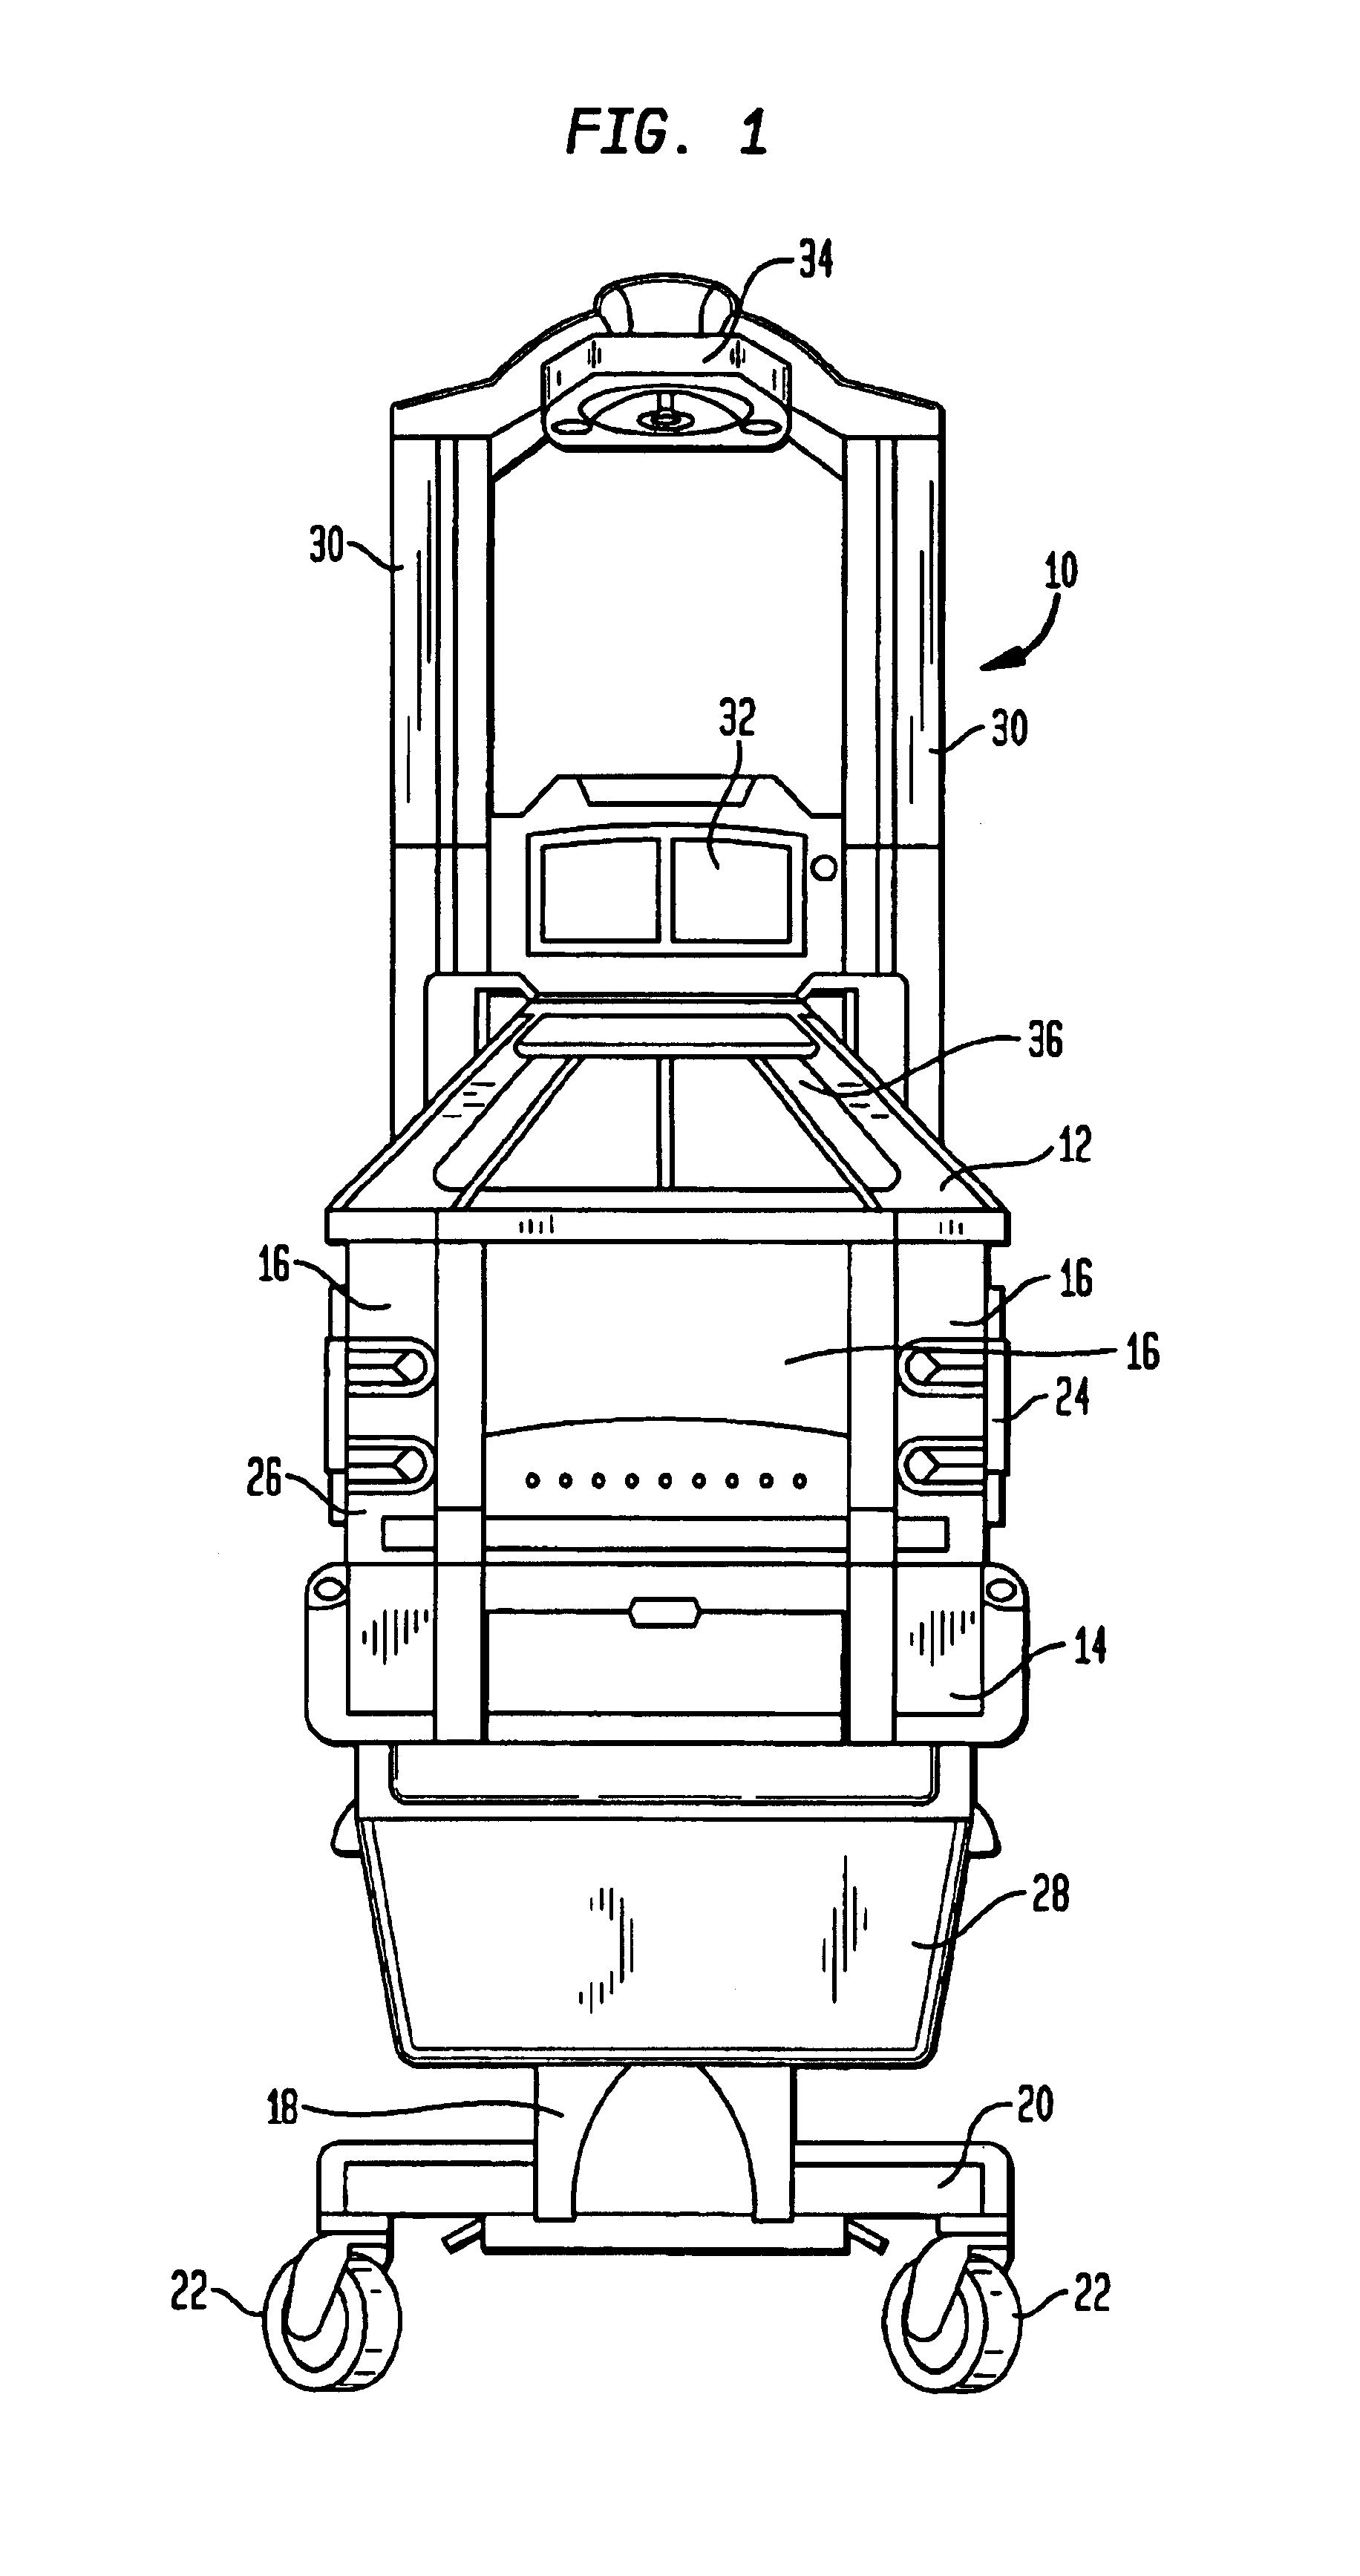 Infant care apparatus with object detection sensing